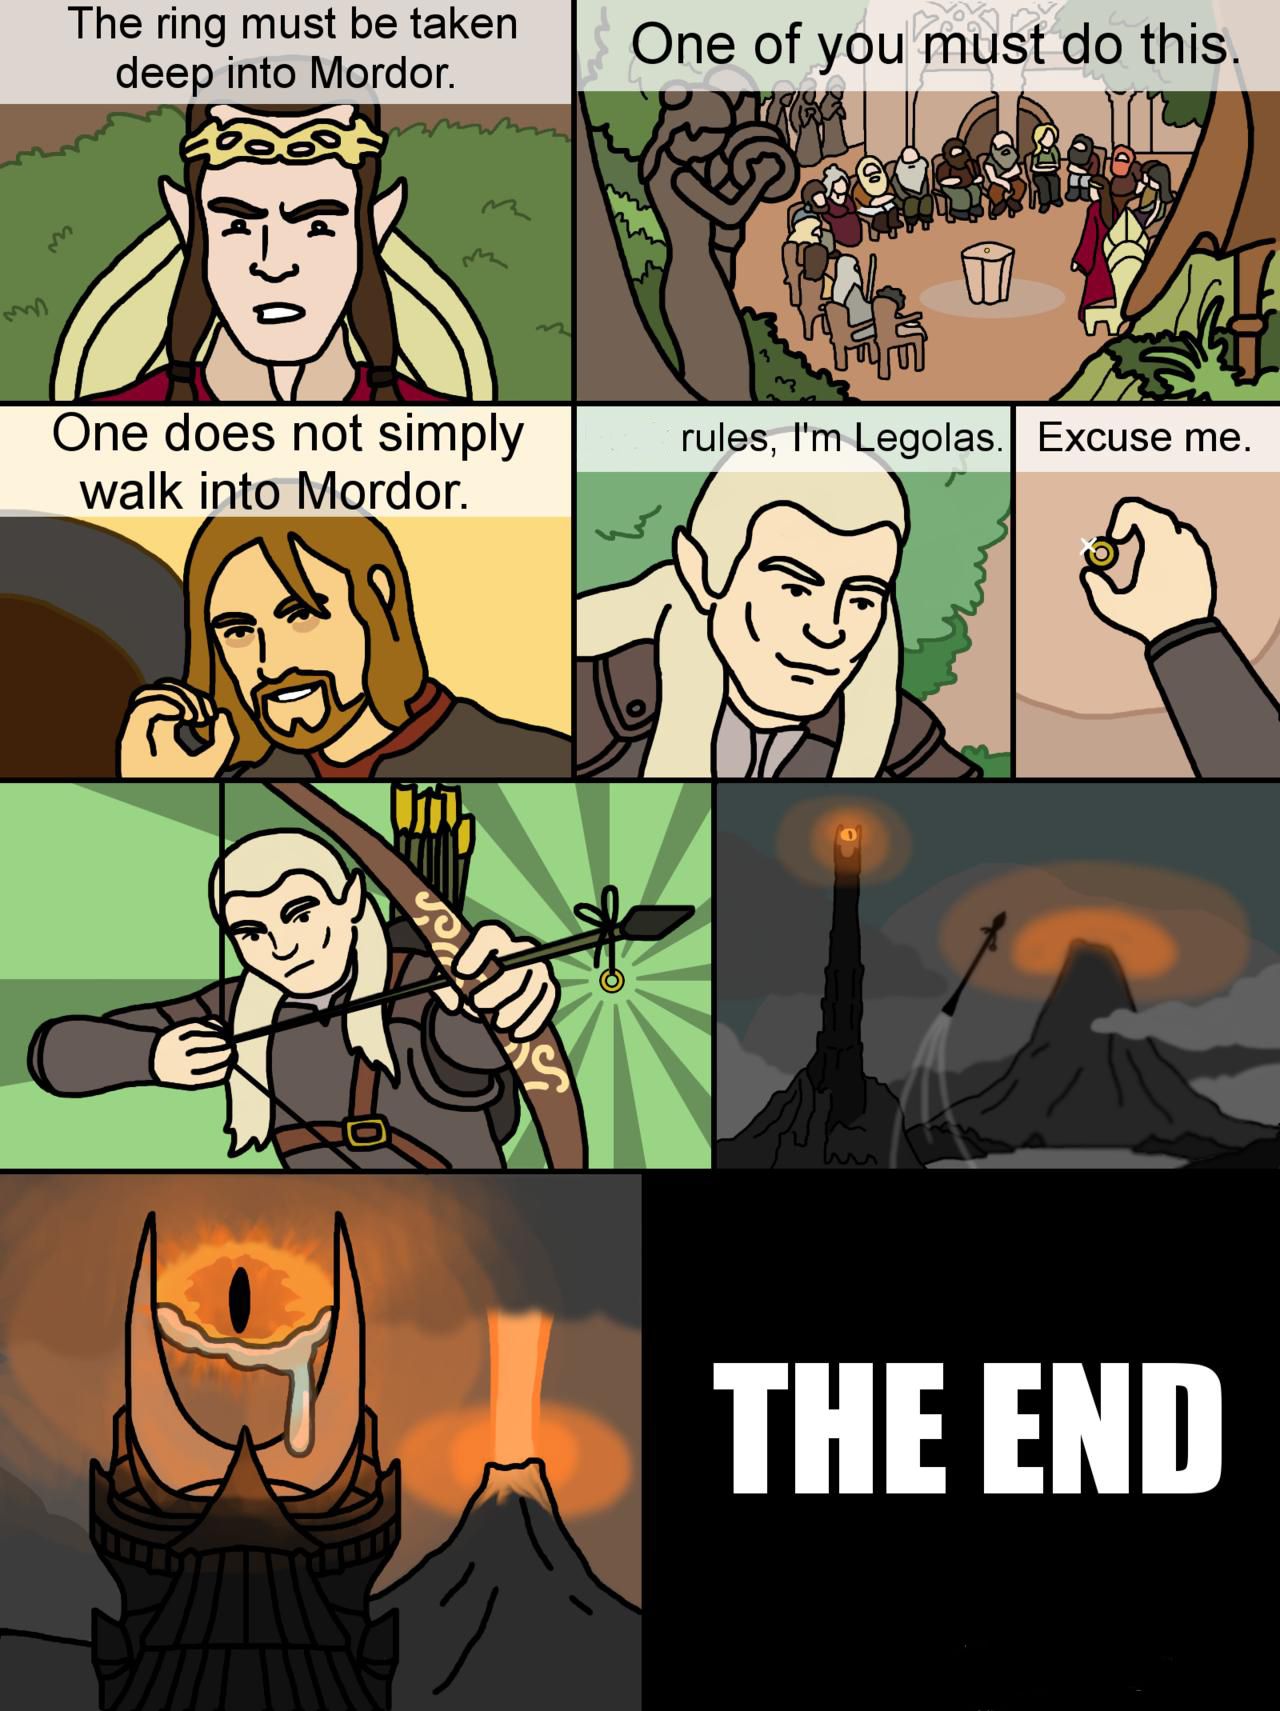 30 Hilarious Lord Of The Rings Logic Comics That Prove The Series Makes No Sense